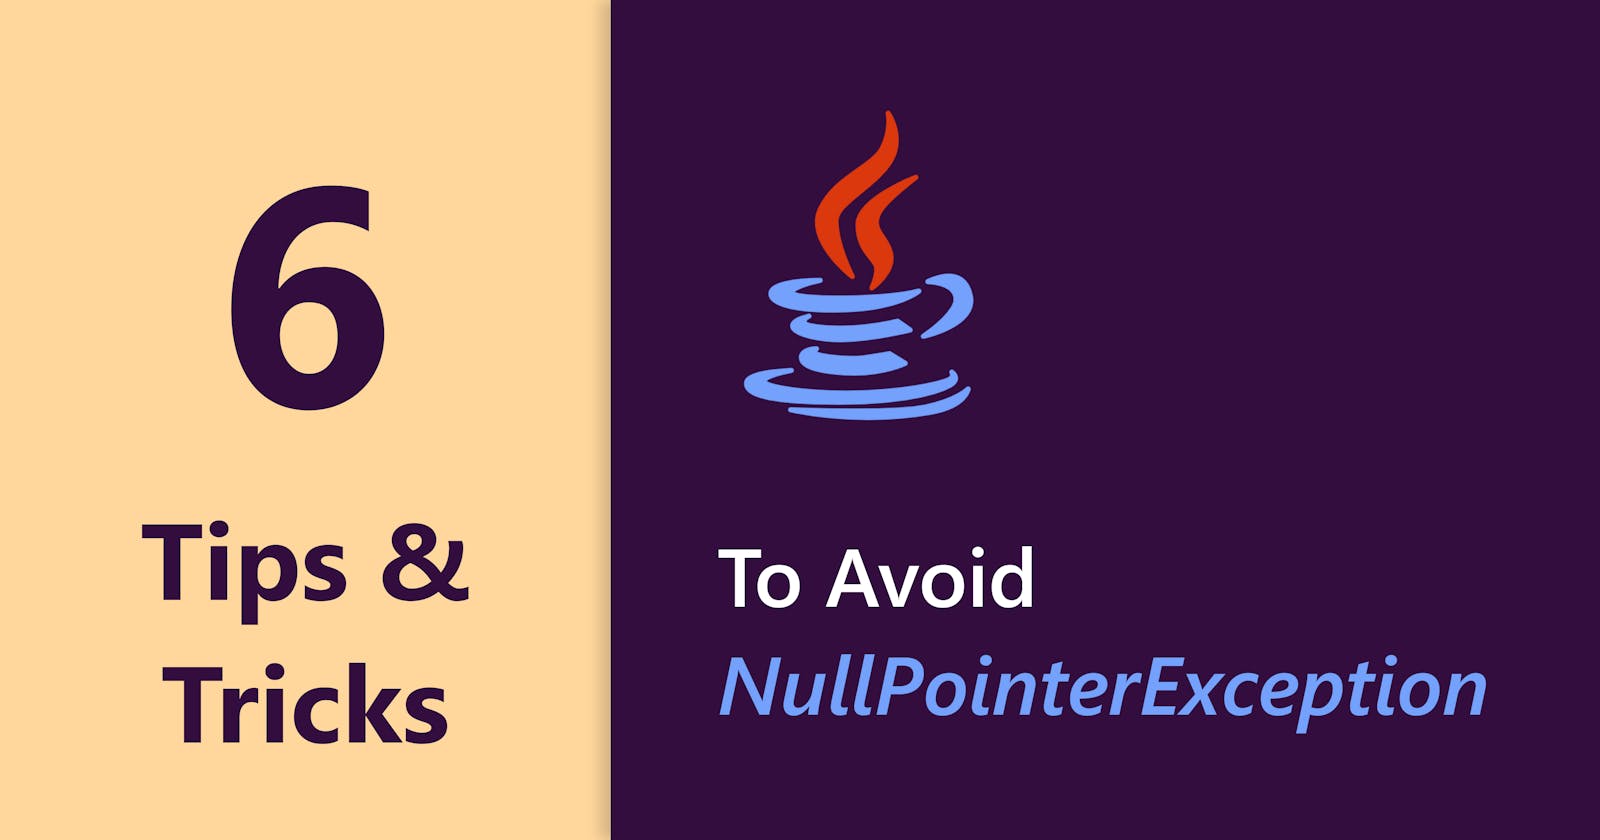 6 Tips and Tricks to avoid NullPointerException